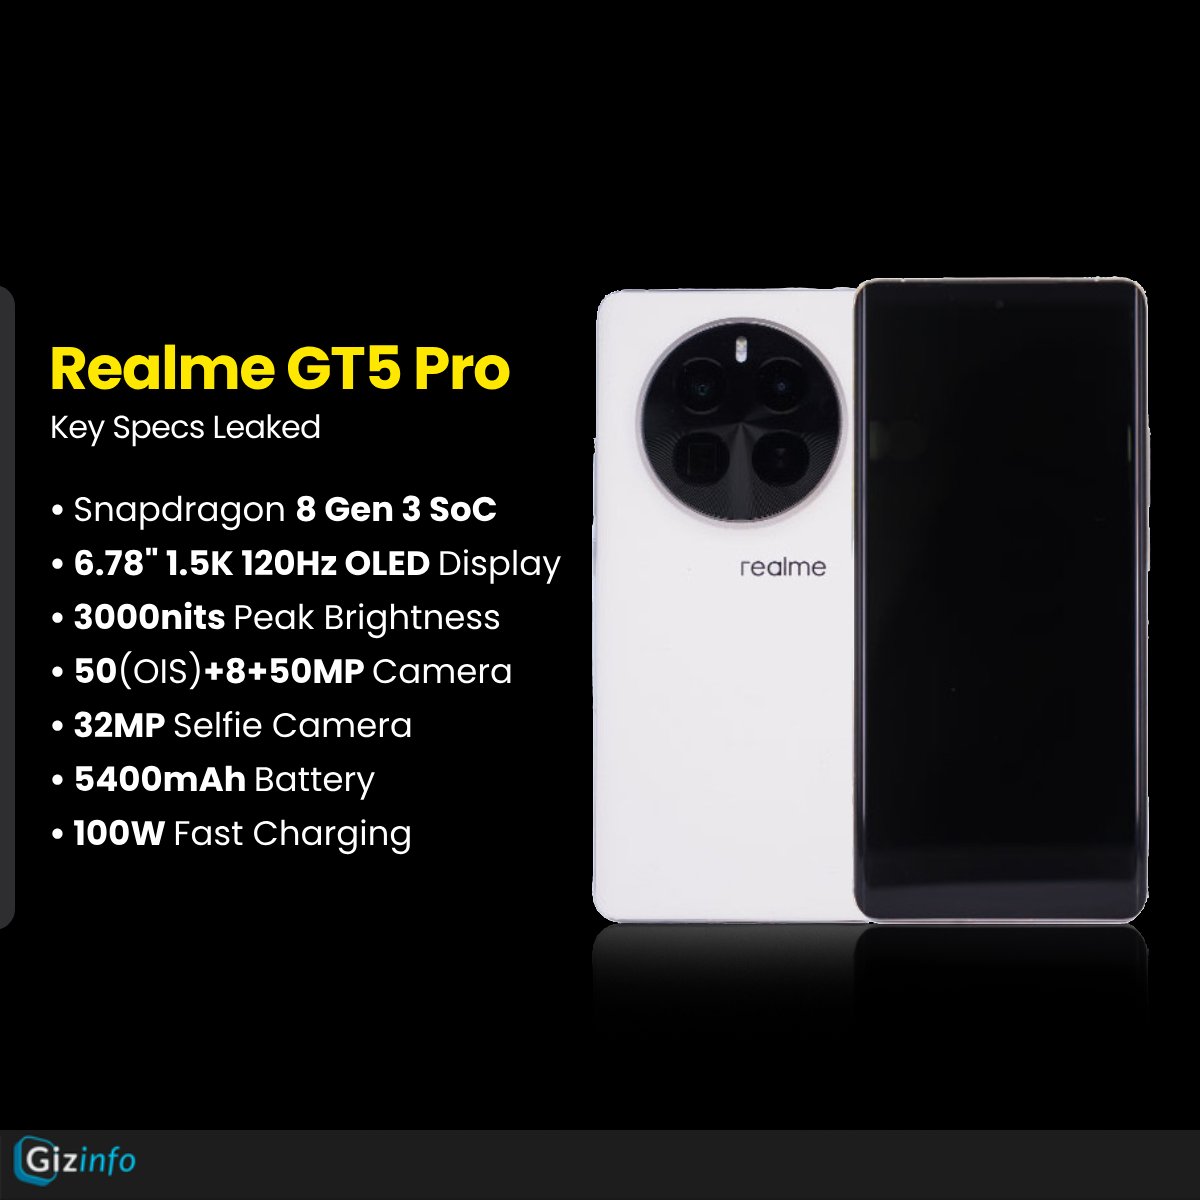 Gizinfo.com on X: Realme GT5 Pro coming very soon with Snapdragon 8 Gen 3  processor #Realme #RealmeGT5Pro #RealmeGT #Snapdragon8Gen3   / X